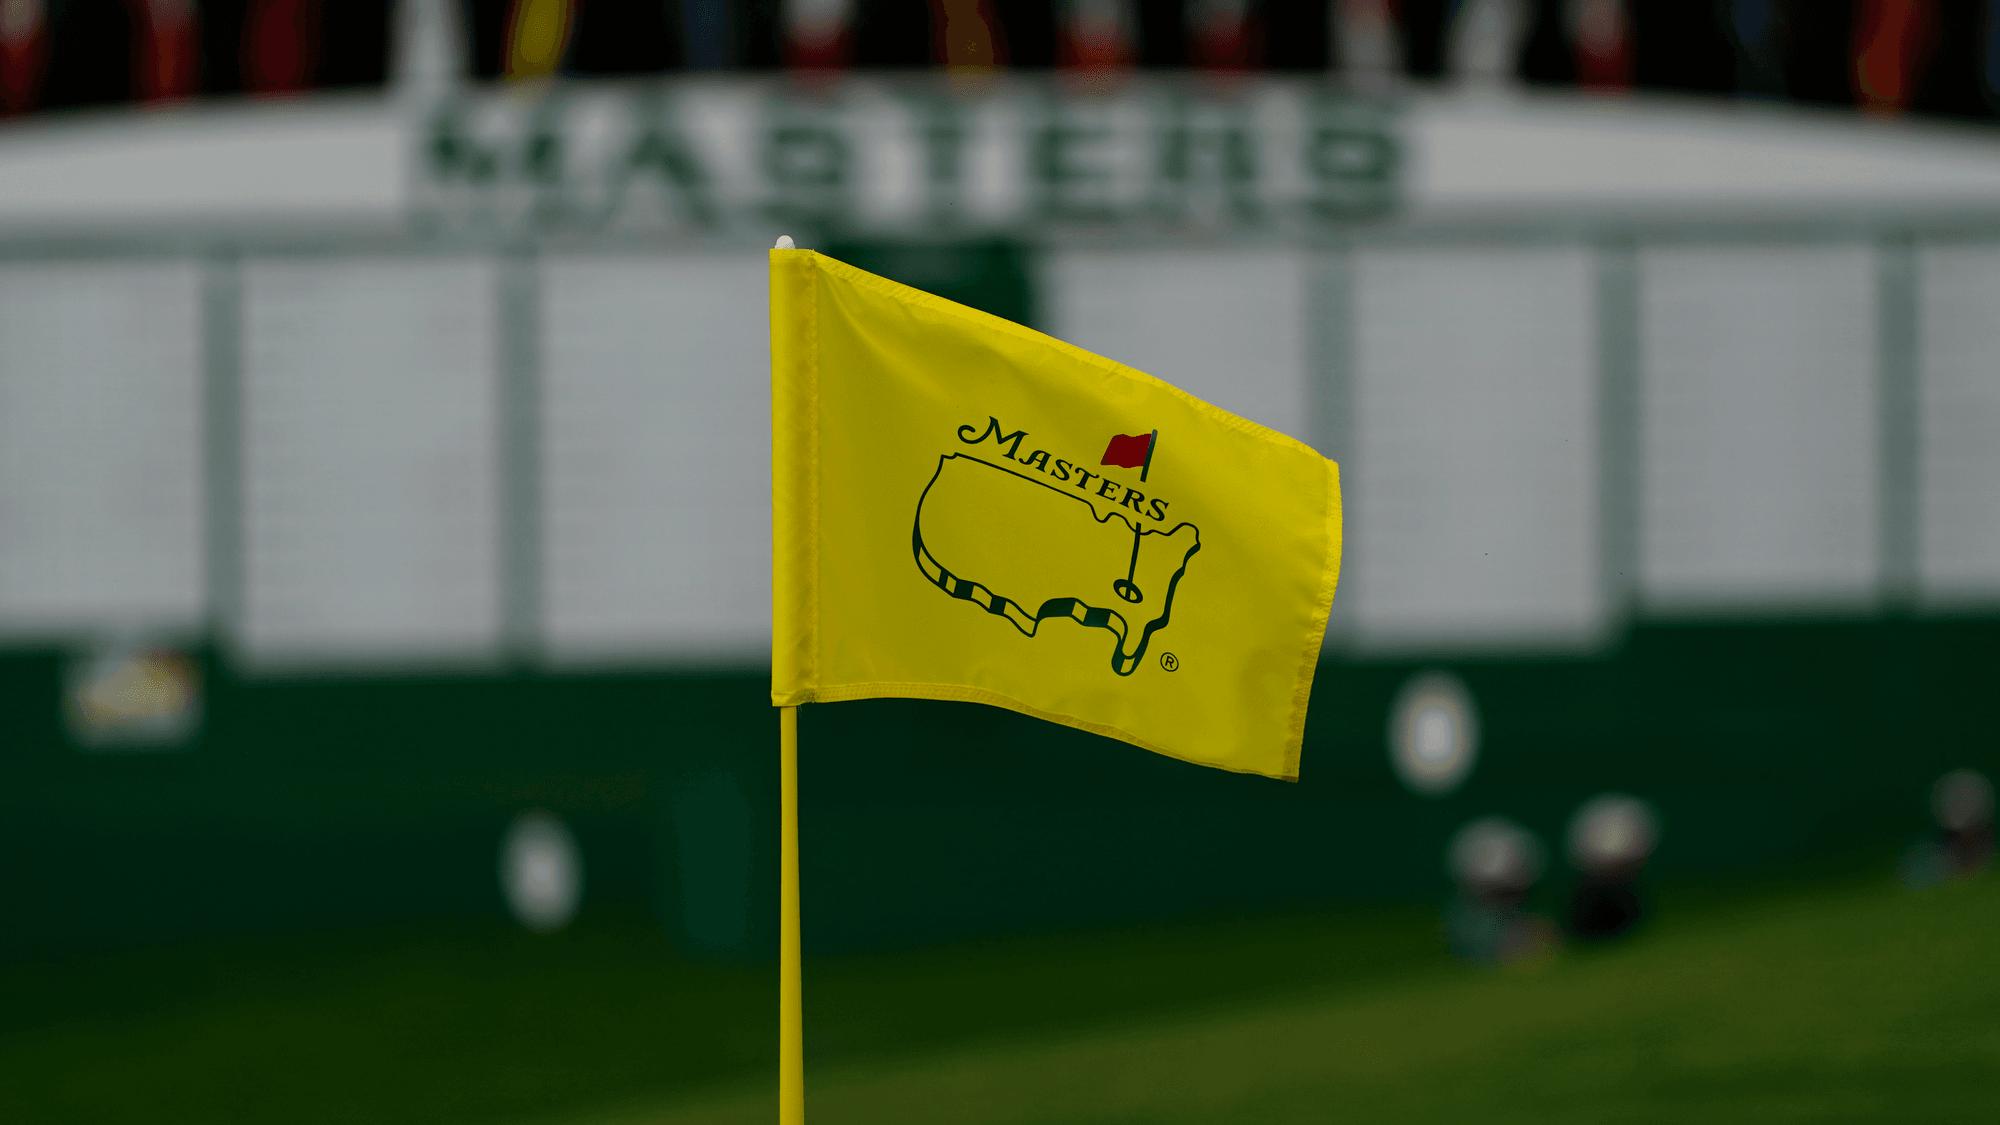 2021 Masters Betting Preview, Analysis, and Picks